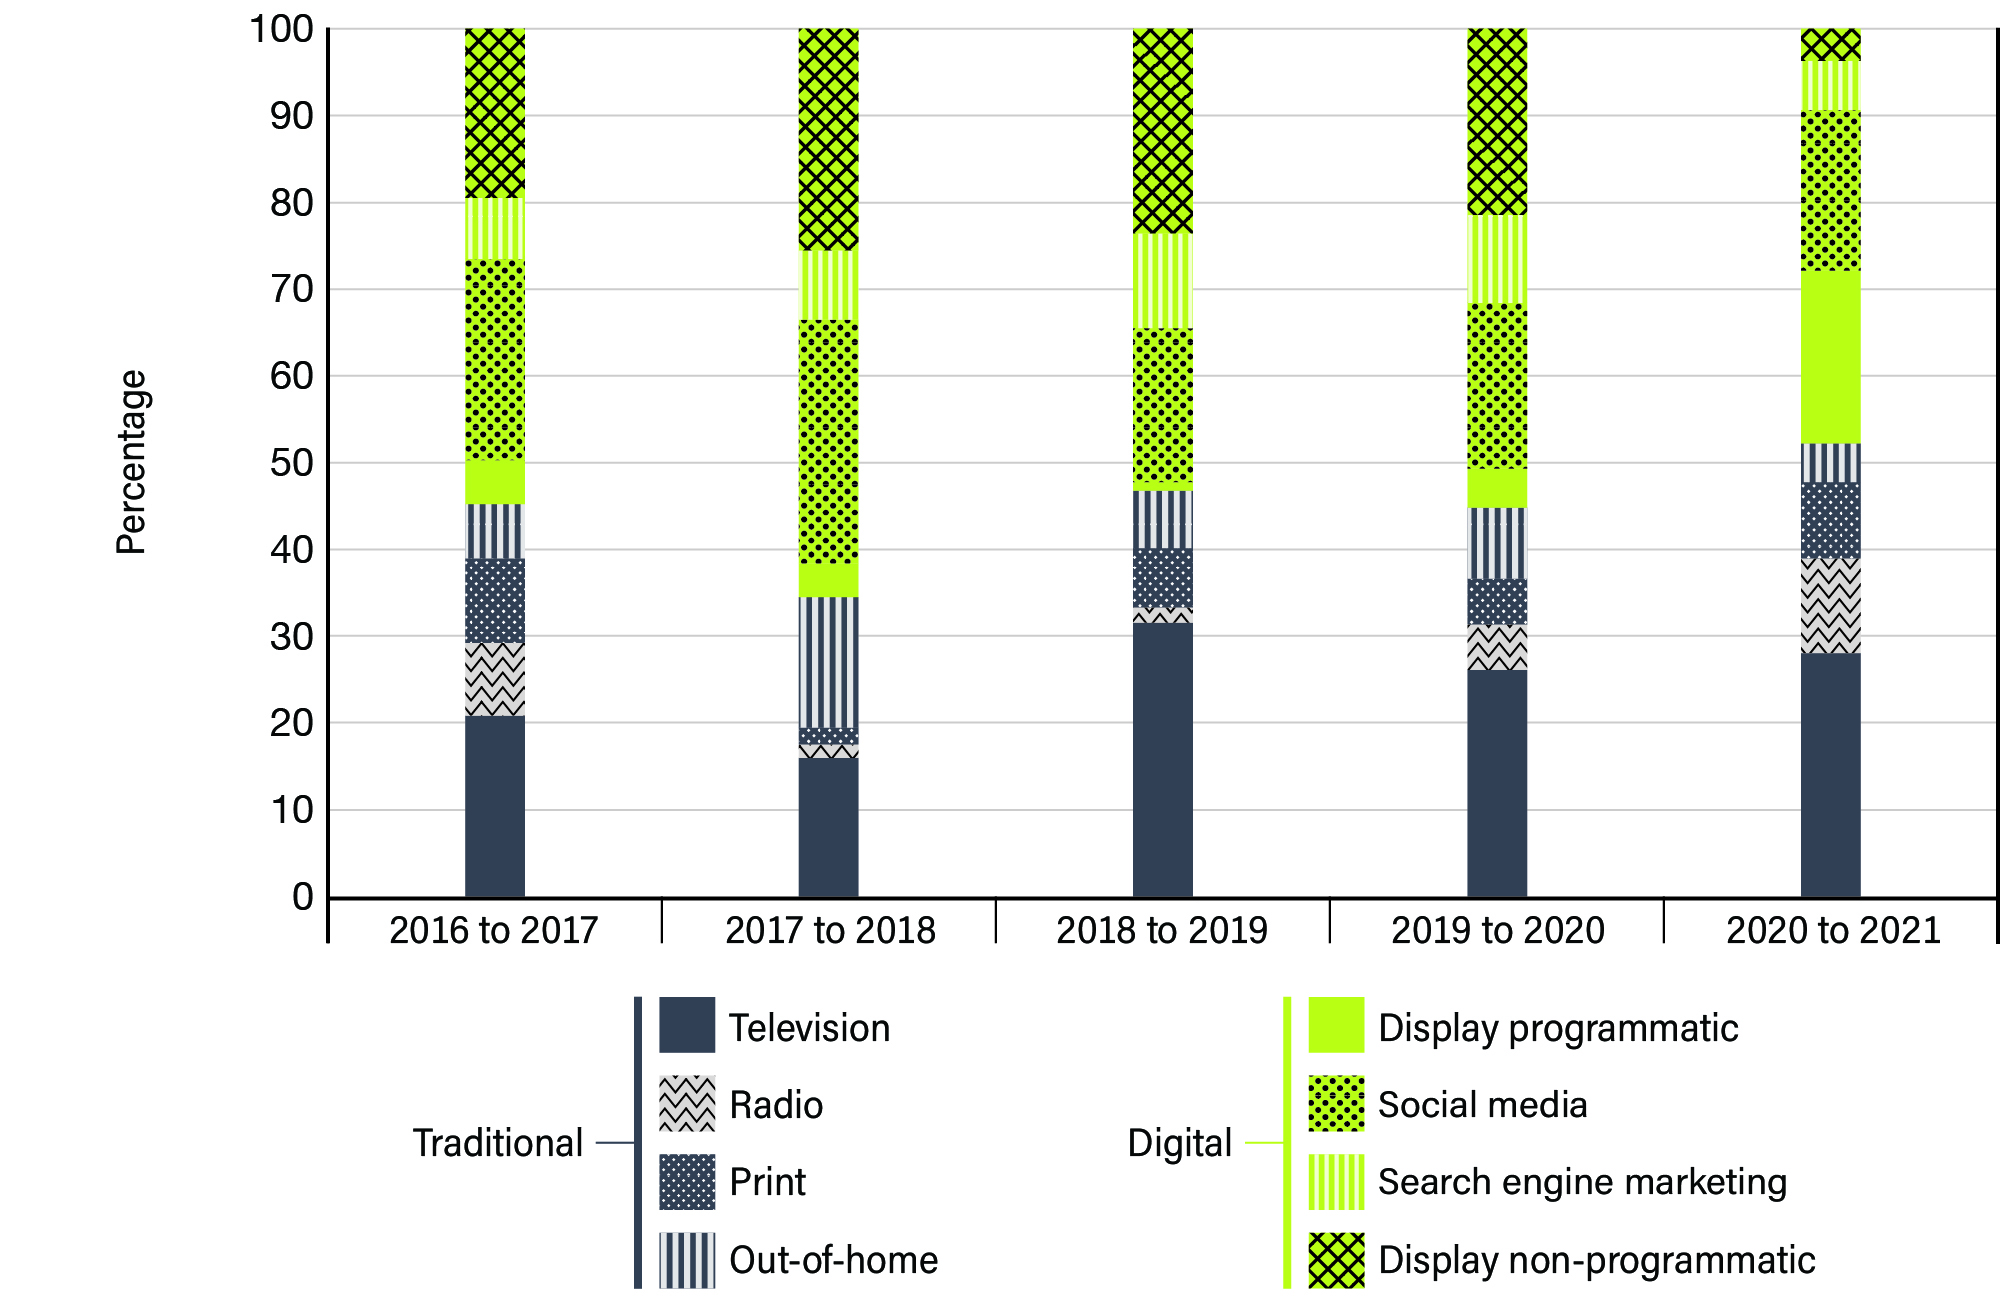 Figure 6: Bar graph displaying distribution of media expenditures by media type over 5 years - See image description below.